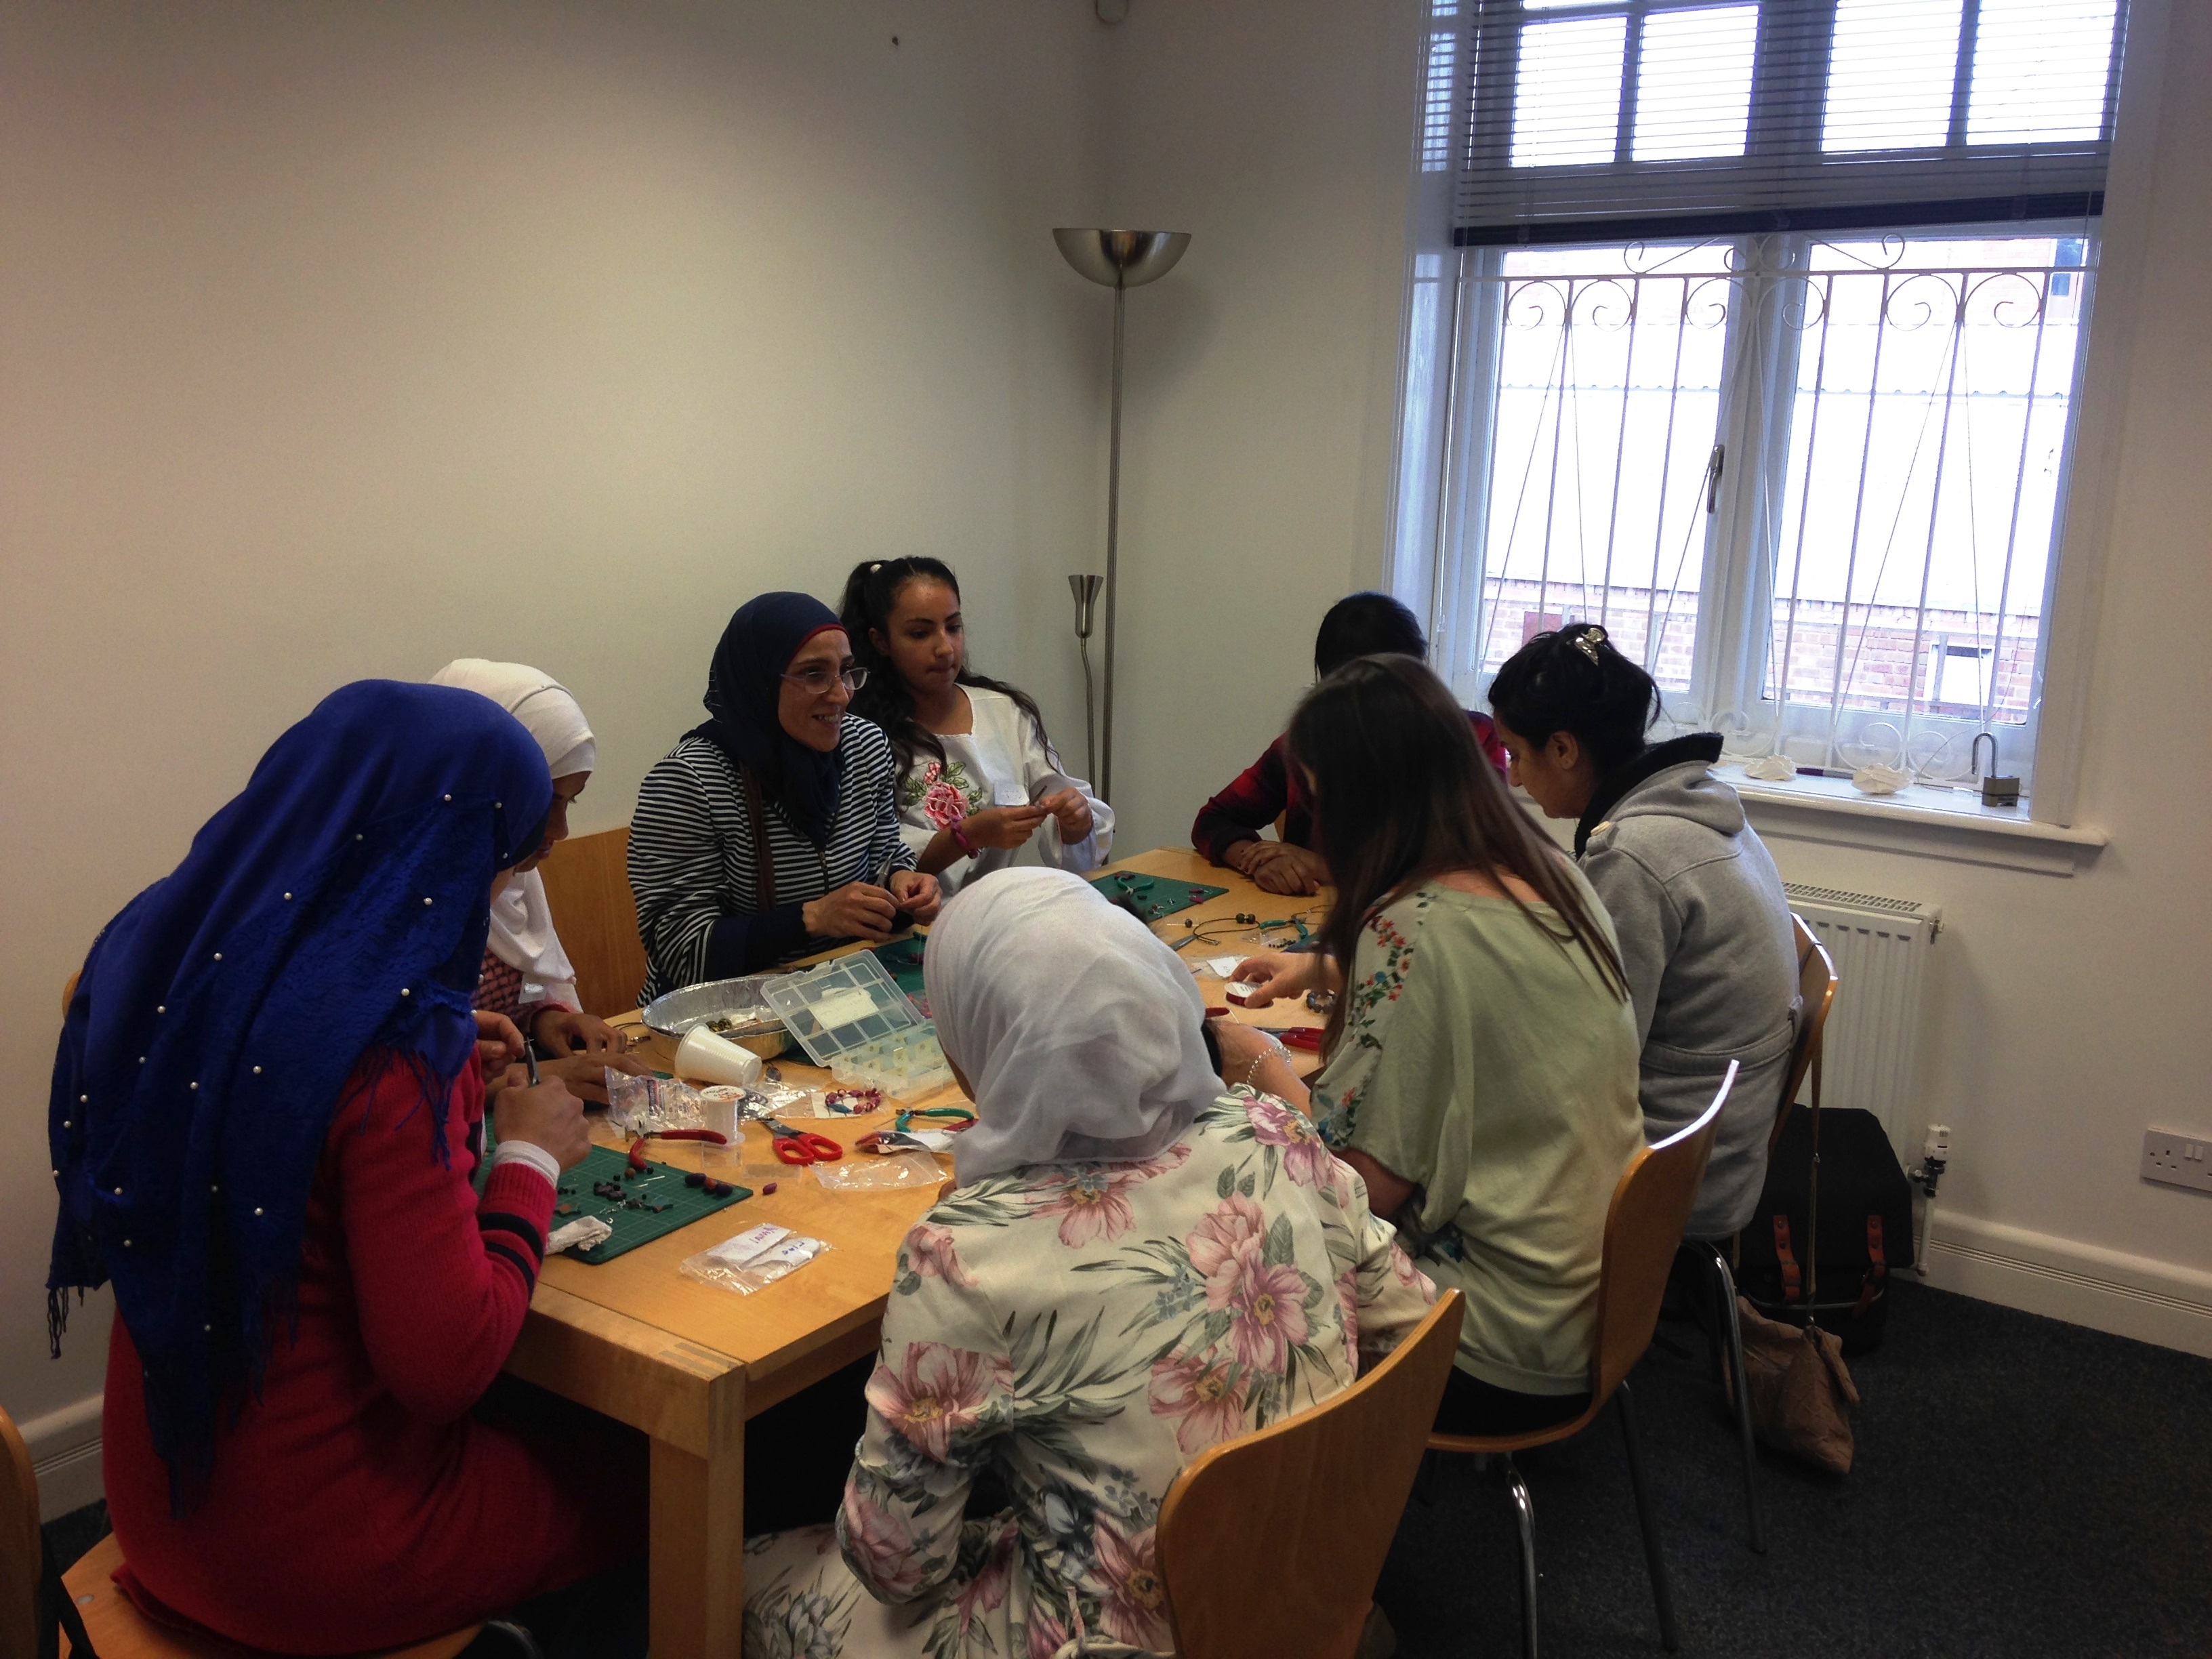 The group is working on assembling their jewellery